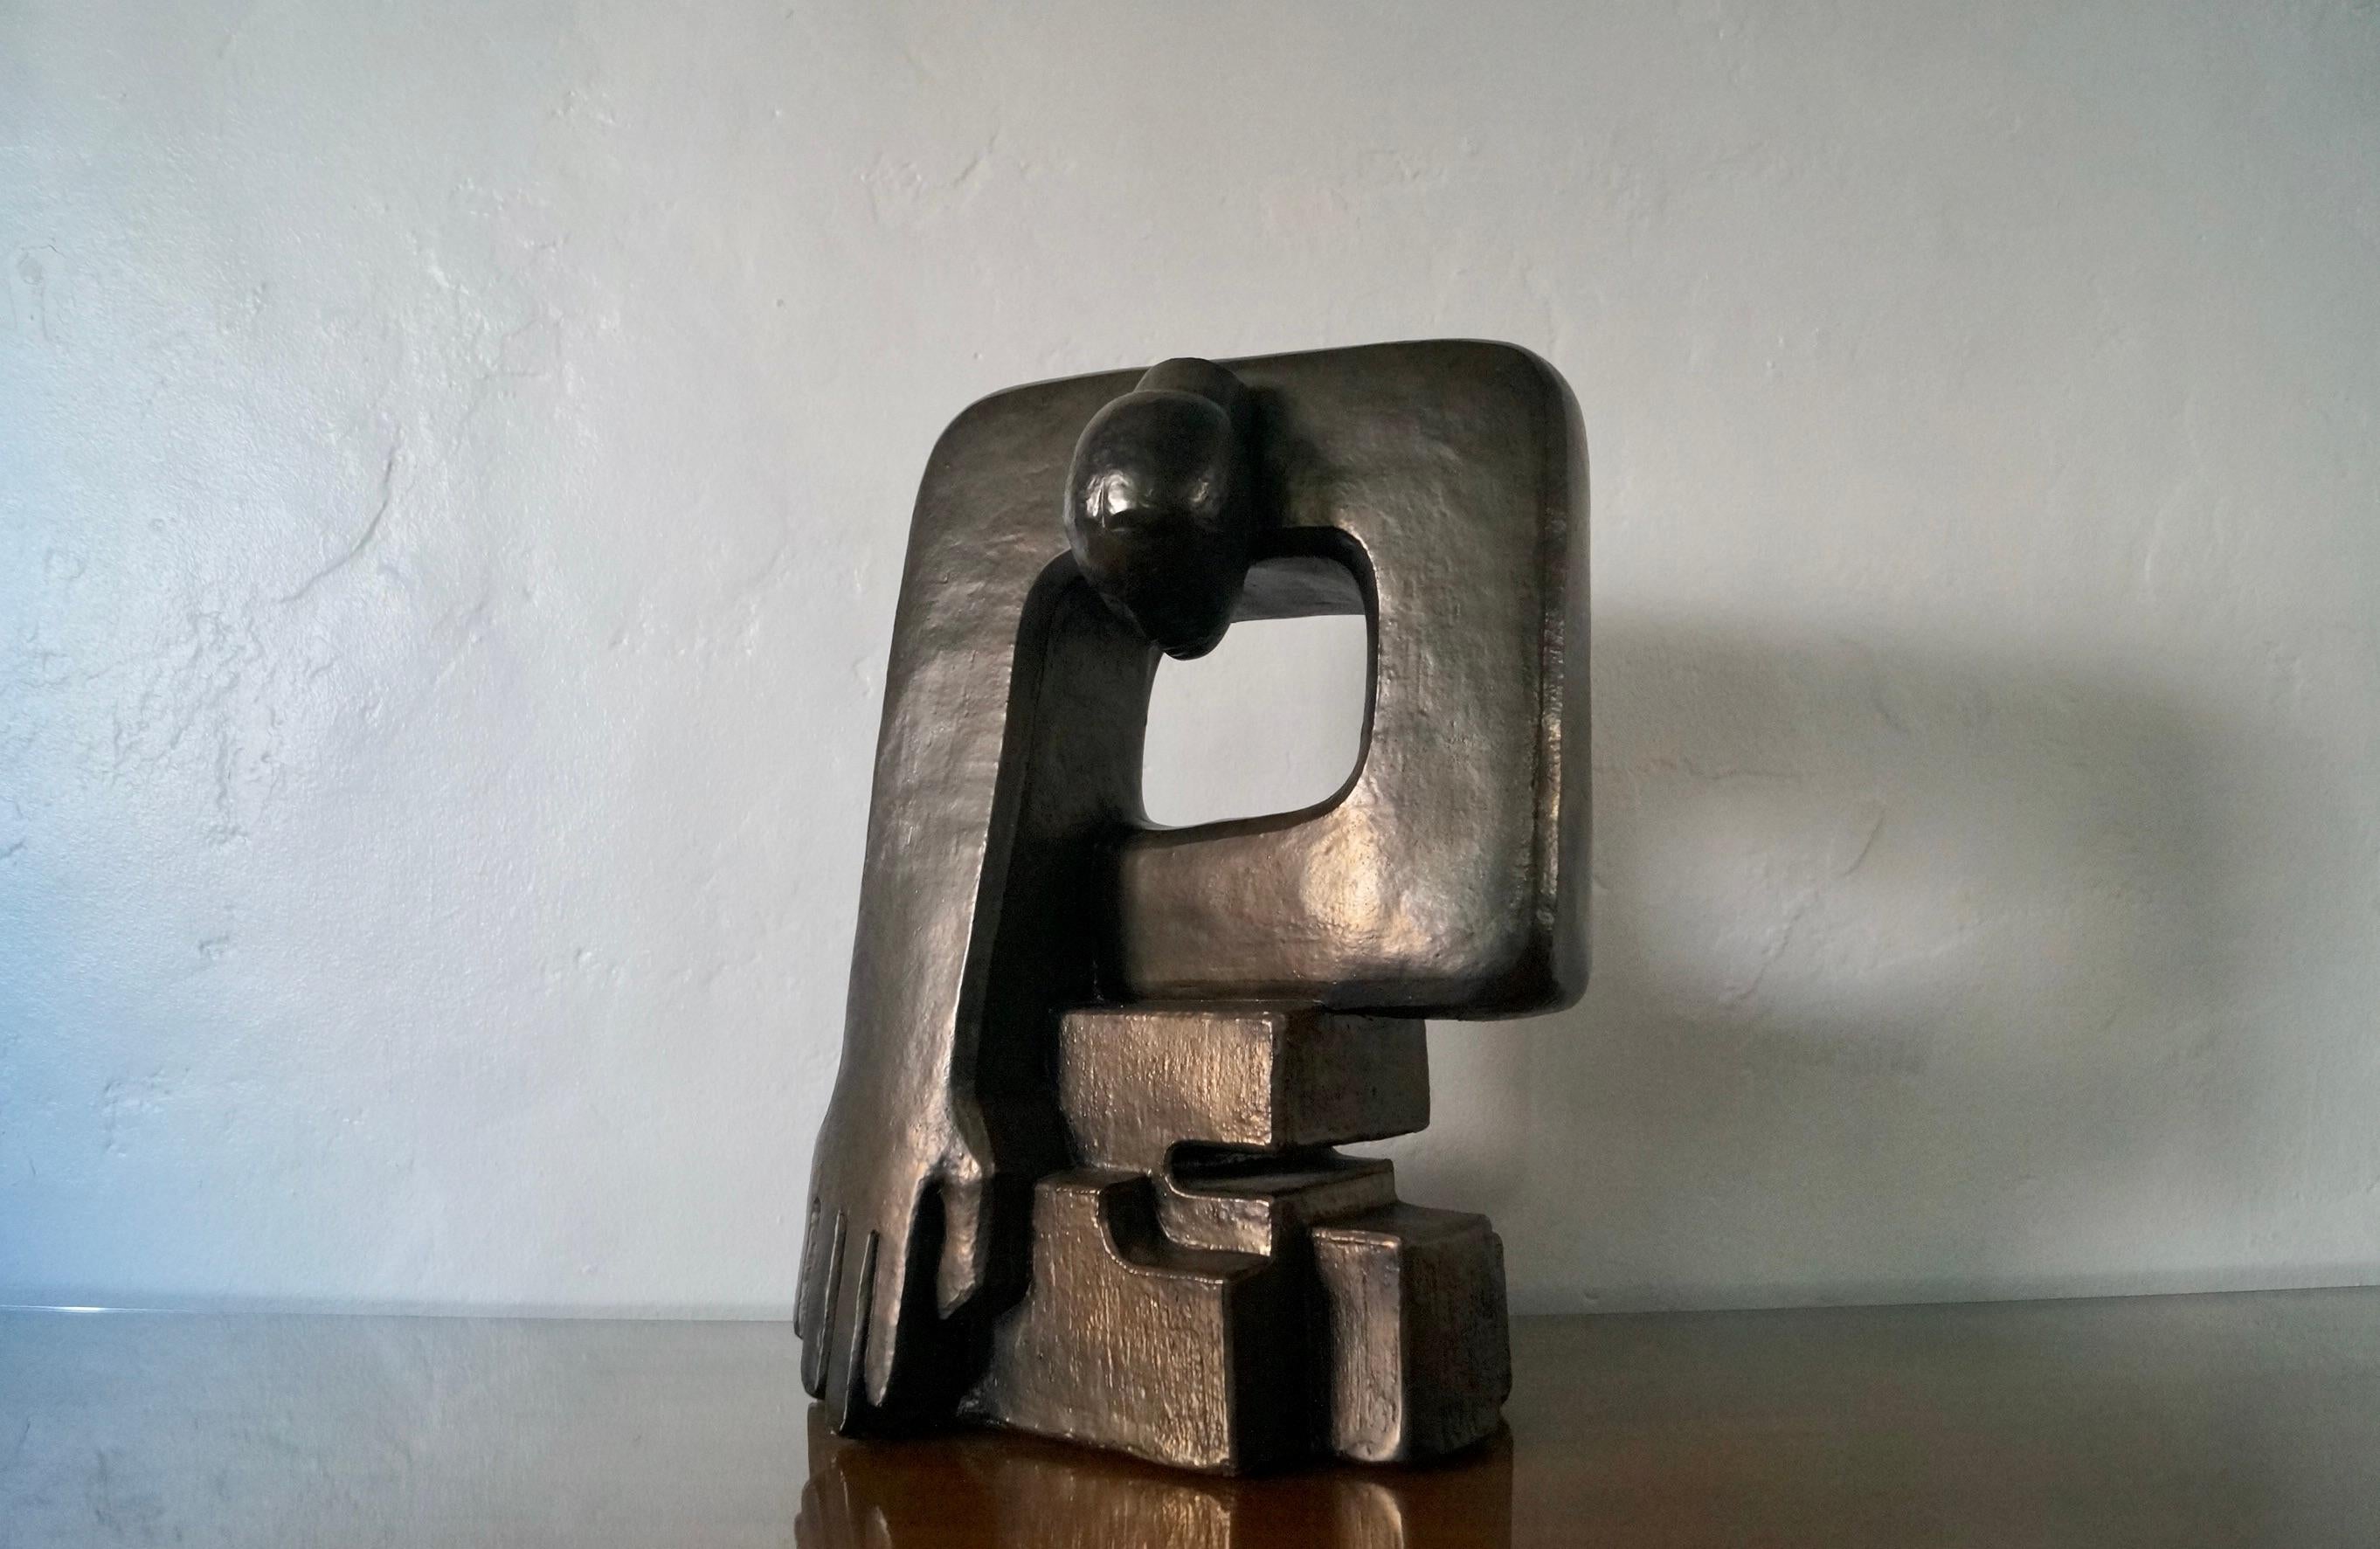 Vintage Midcentury Modern sculpture for sale. Very beautiful abstract cubist statue created by artist Carole Shultz, and dated 1975. This is a numbered sculpture, and only 250 were made. Very unique and reminiscent of Picasso and Diego Rivera works